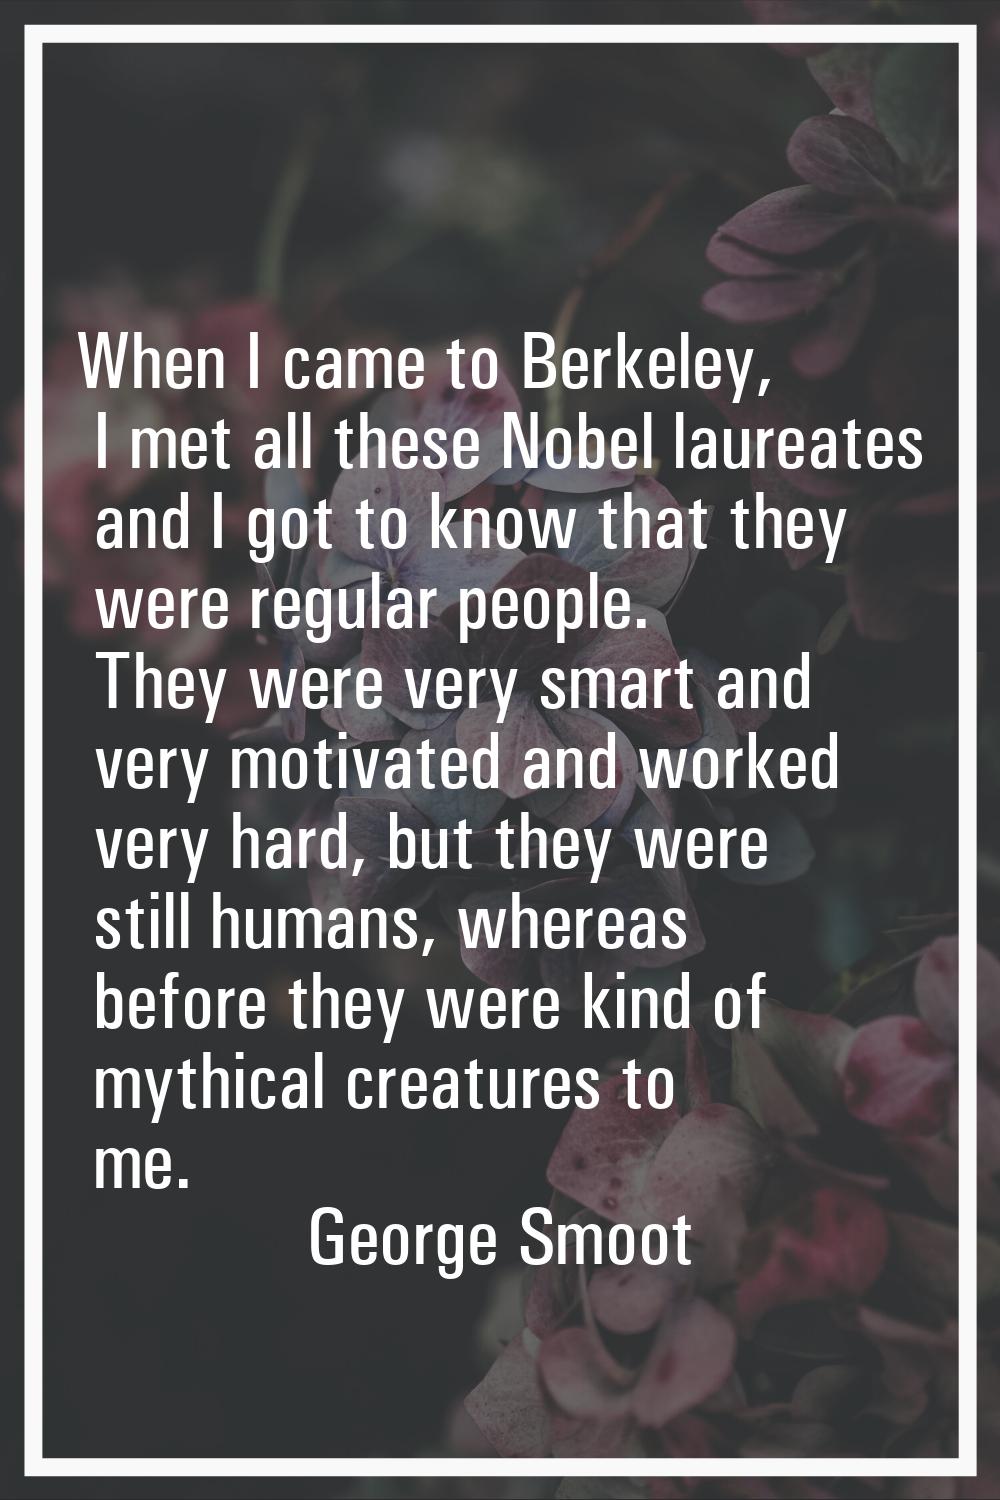 When I came to Berkeley, I met all these Nobel laureates and I got to know that they were regular p